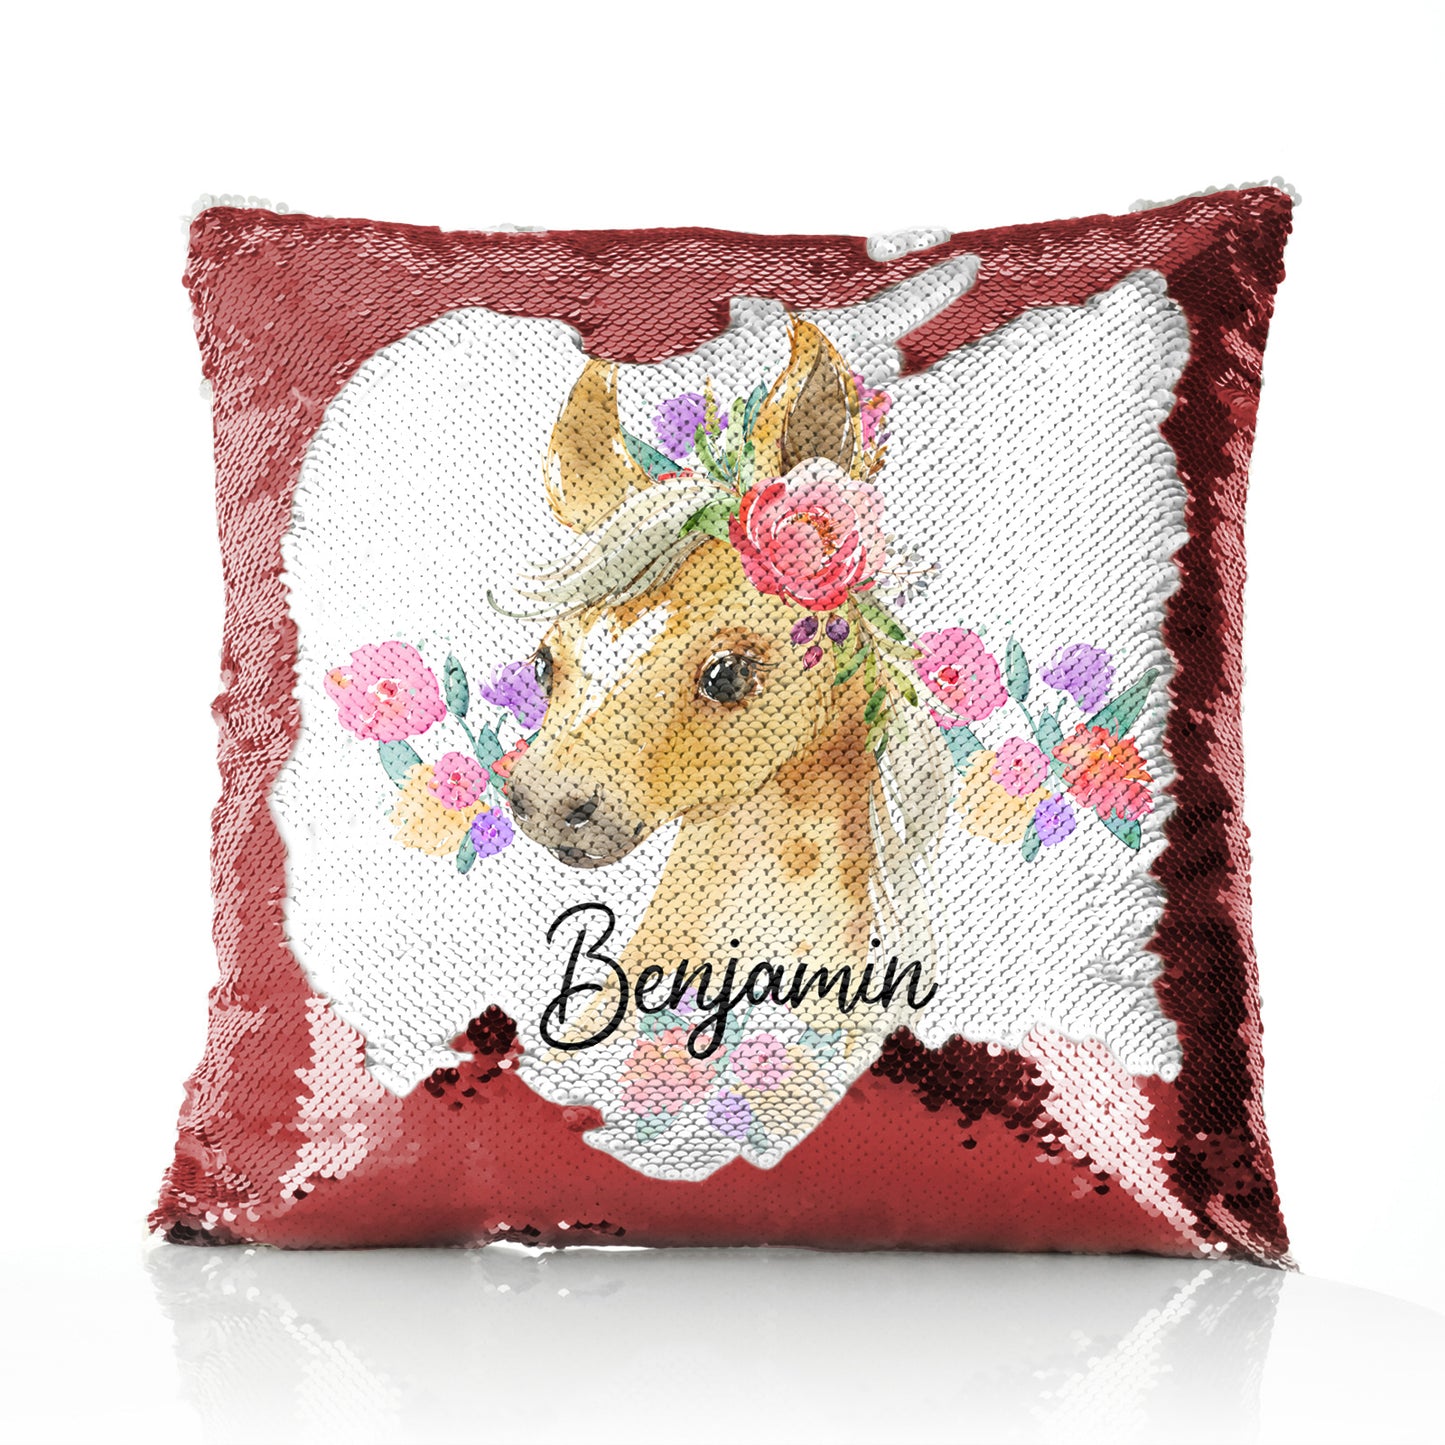 Personalised Sequin Cushion with Palomino Horse Multicolour Flower Print and Cute Text